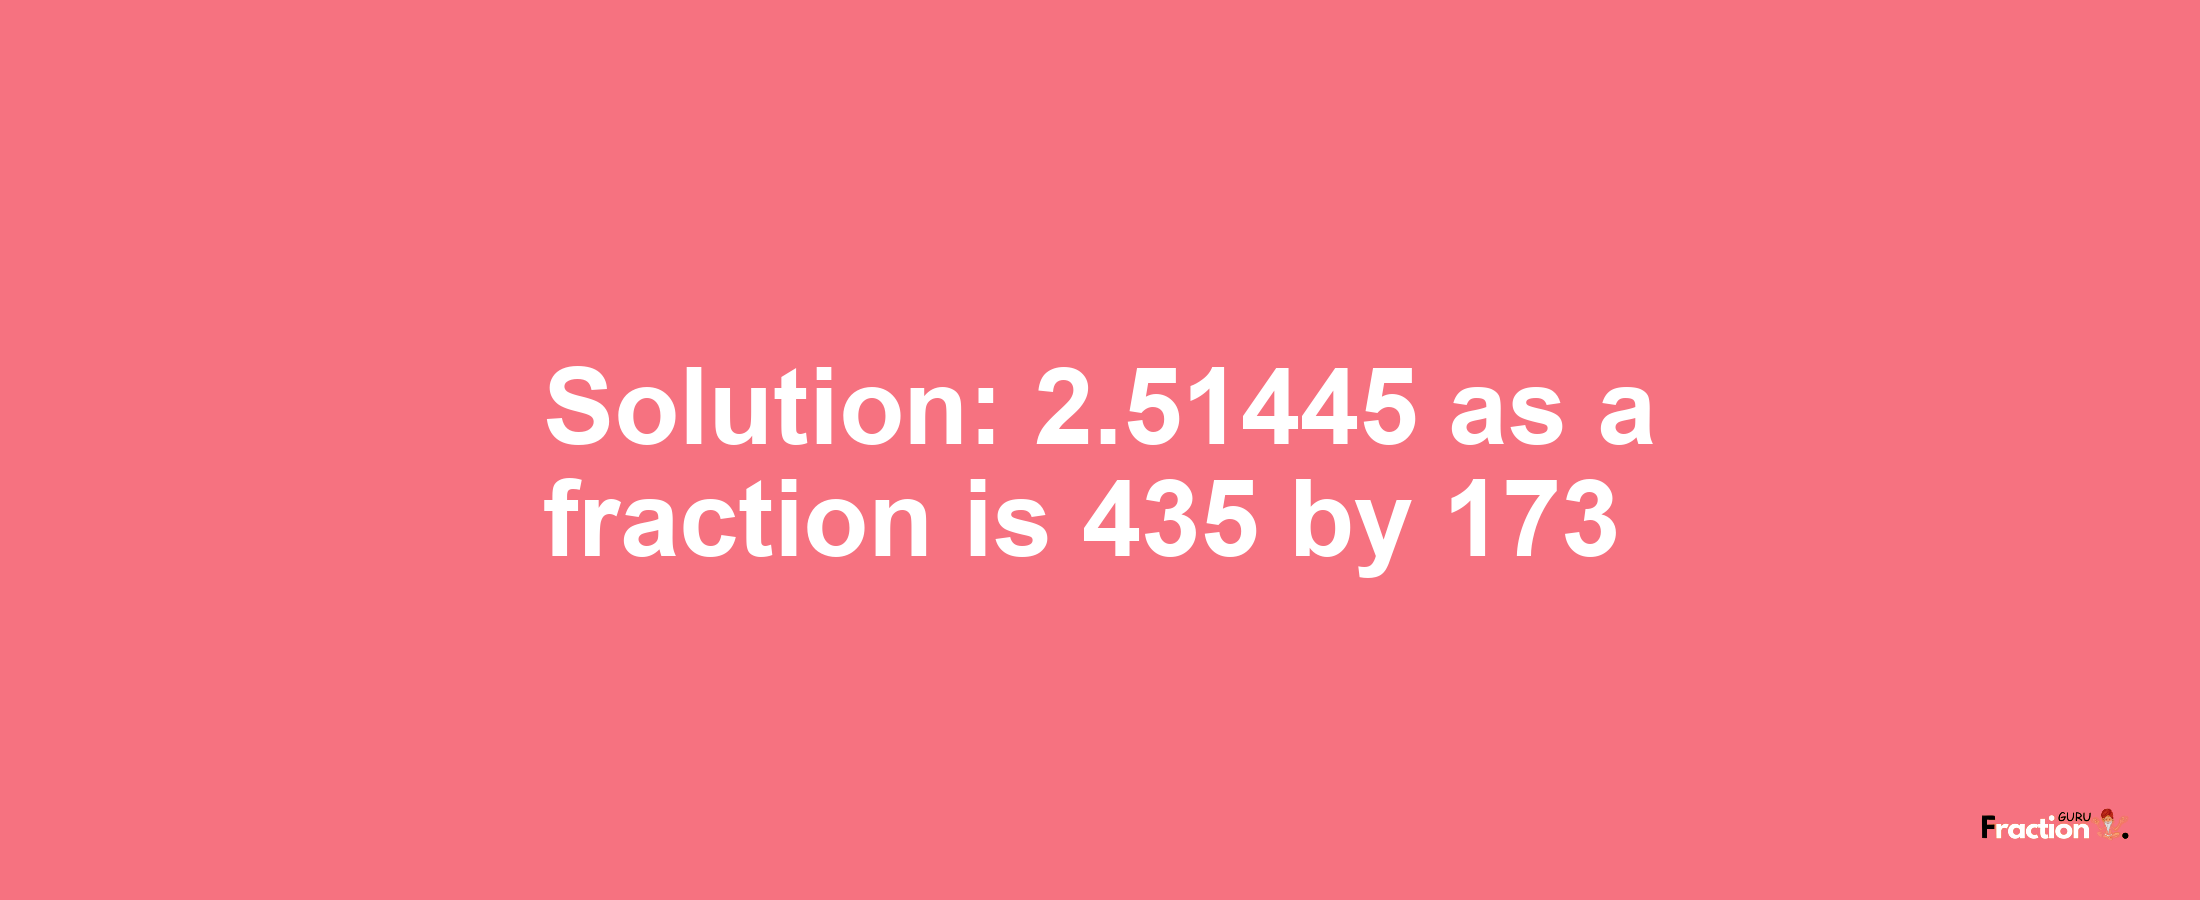 Solution:2.51445 as a fraction is 435/173